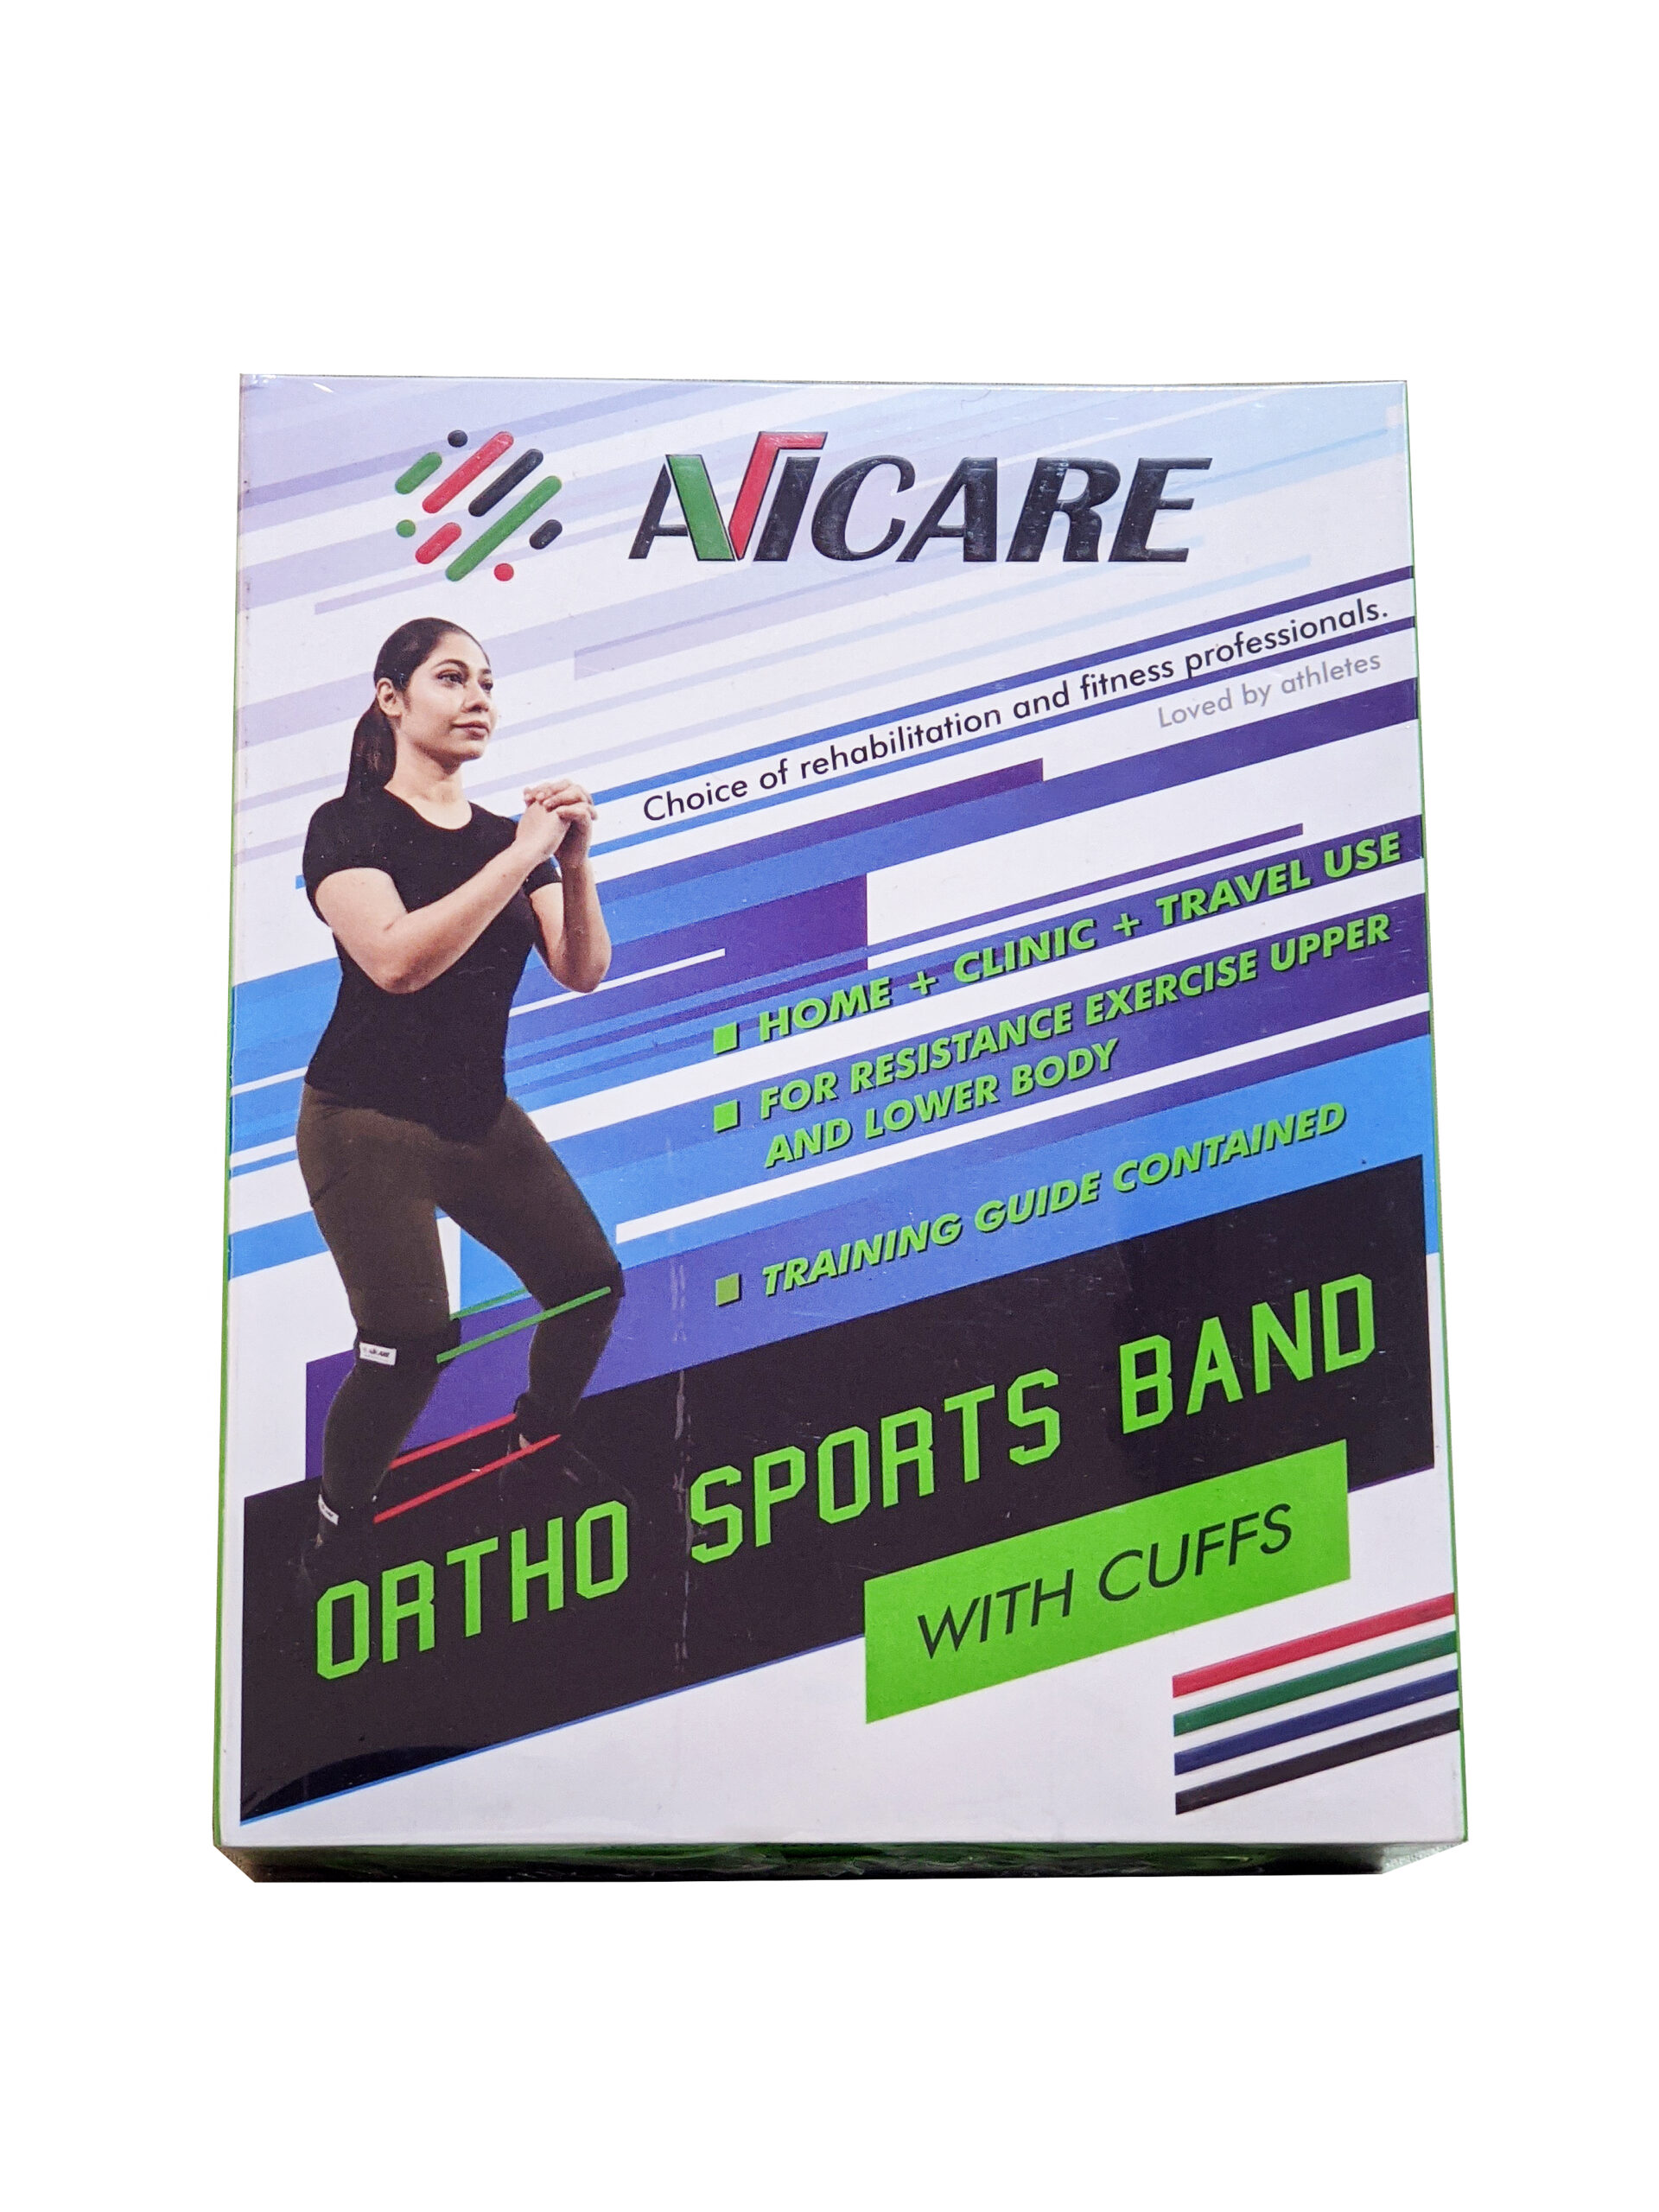 Ortho Sports Band with Cuffs